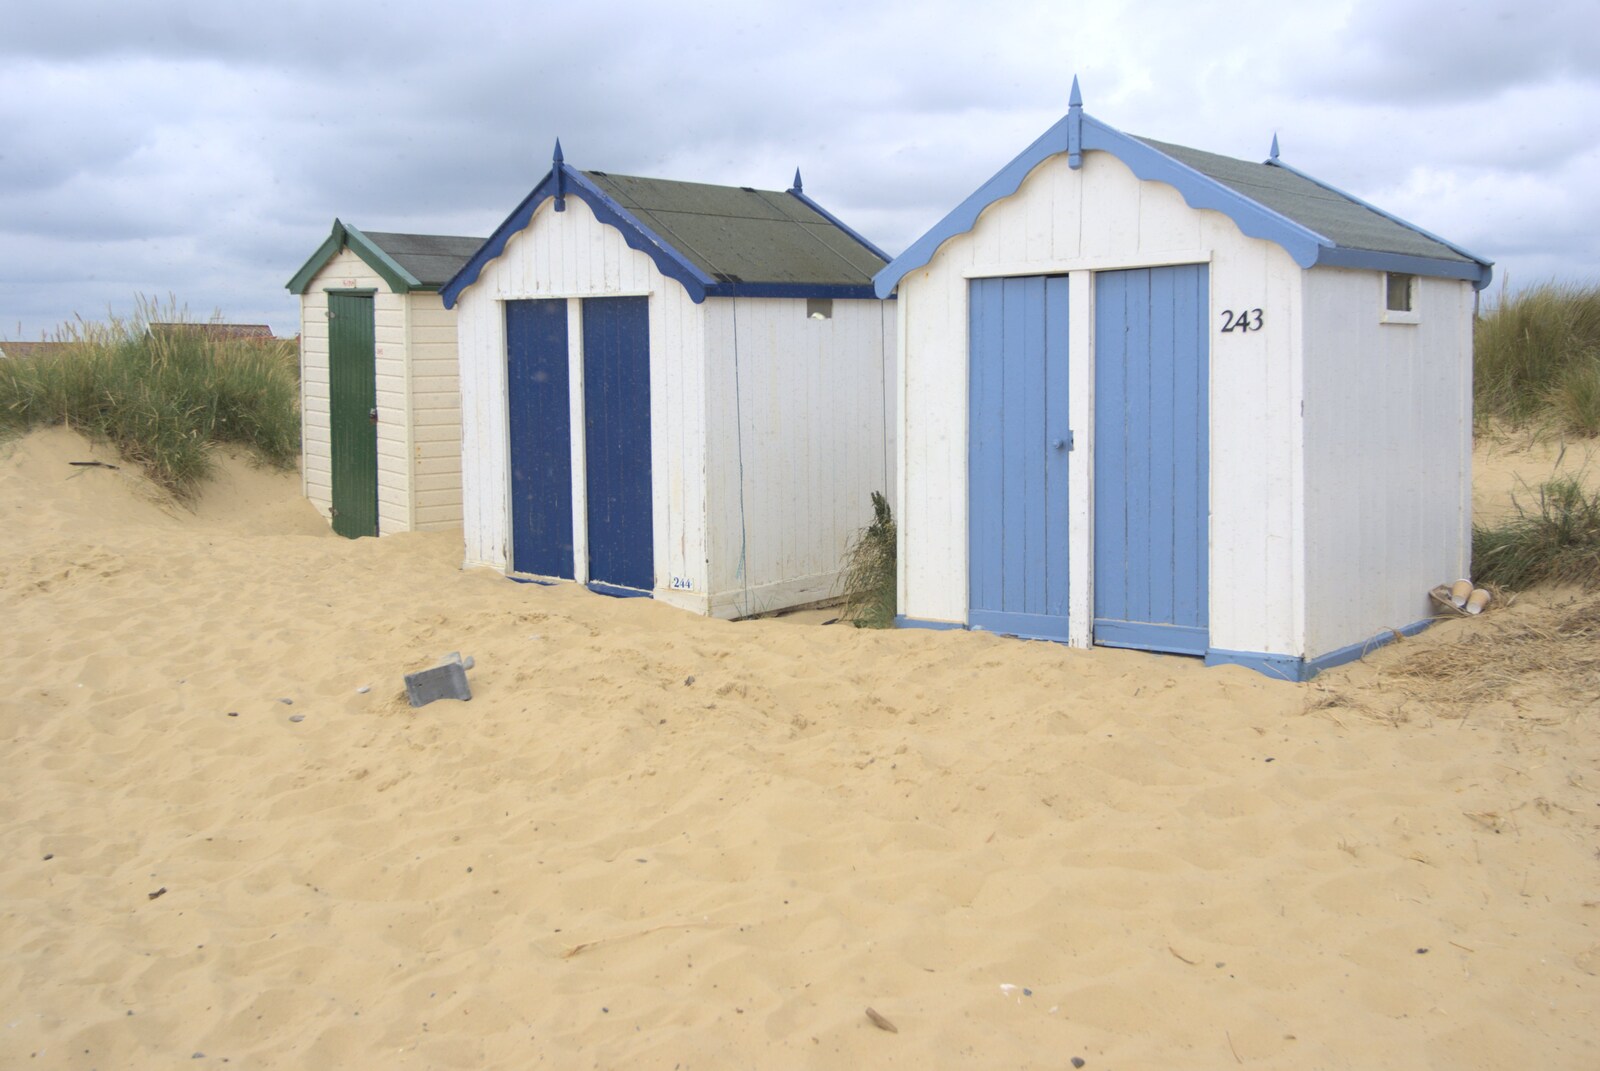 Three beach huts stand alone from A "Minimoon" and an Adnams Brewery Trip, Southwold, Suffolk - 7th July 2010